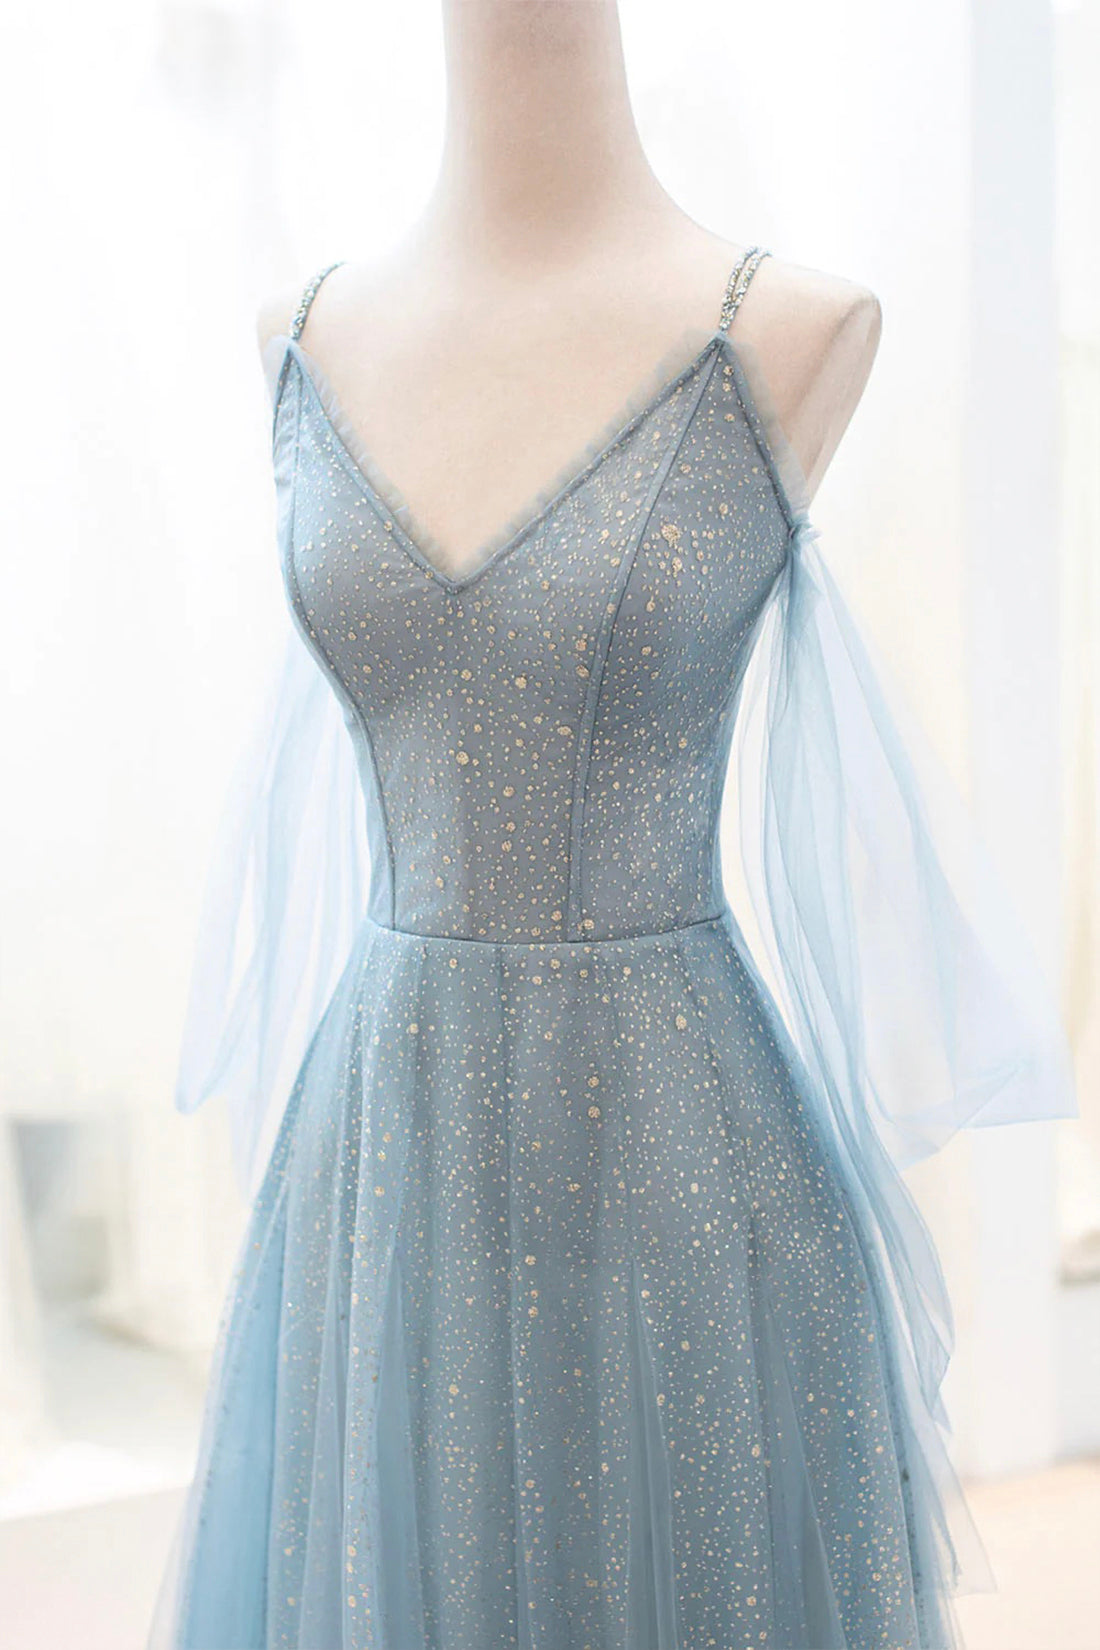 Gala Dress, Dusty Blue Sparkly Tulle Long Prom Dress, A-Line Spaghetti Strap Evening Dress